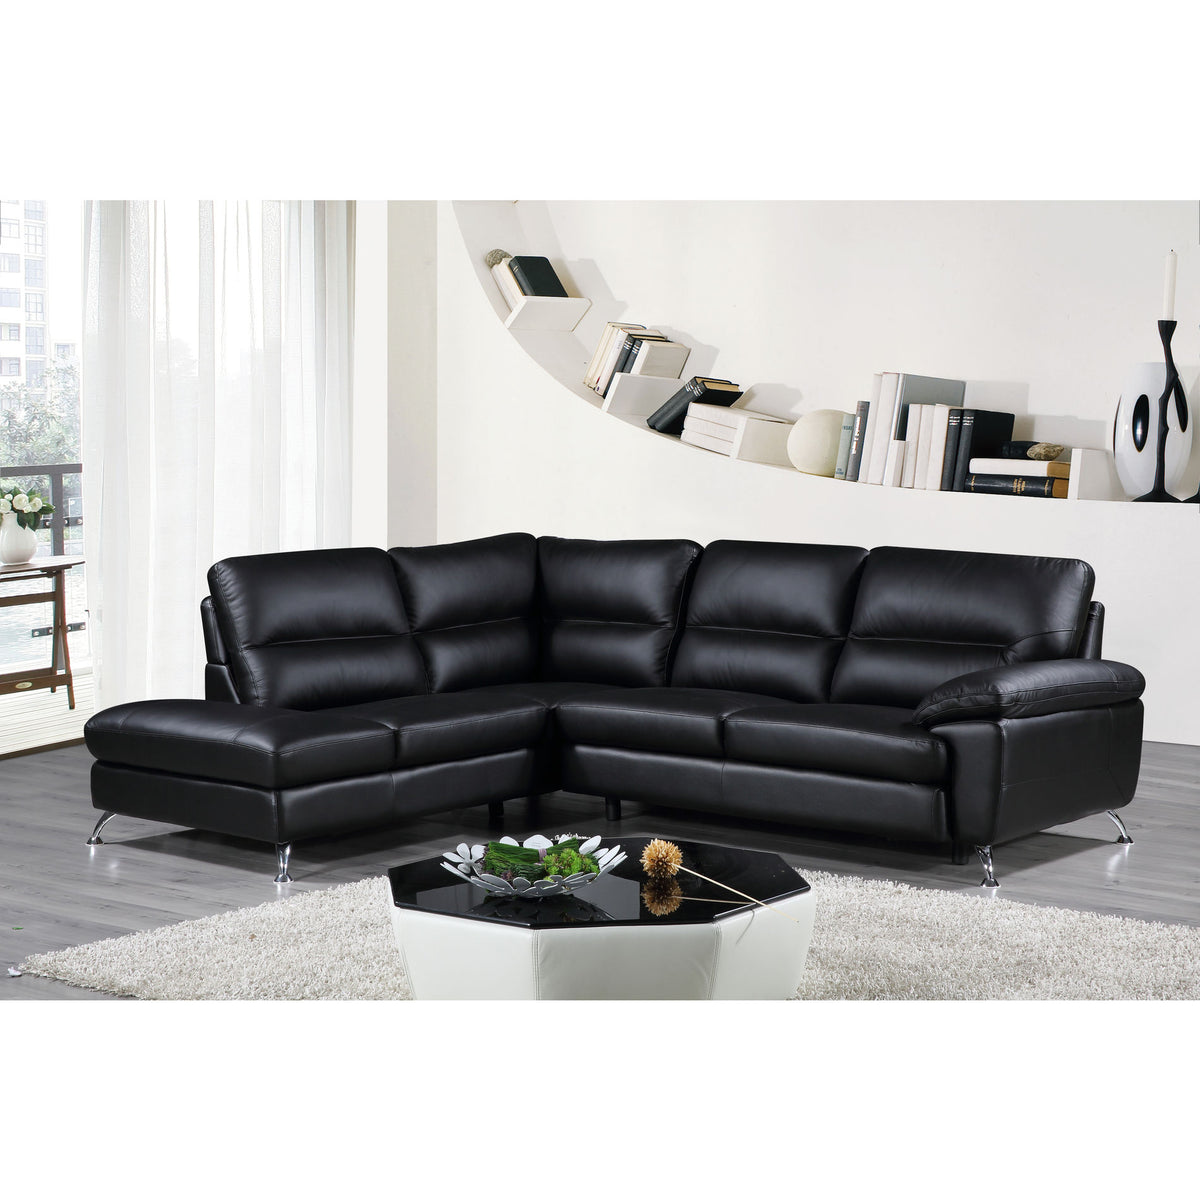 Cortesi Home Contemporary Boston Genuine Leather Sectional Sofa with Left Chaise Lounge, Black 80&quot;x98&quot;